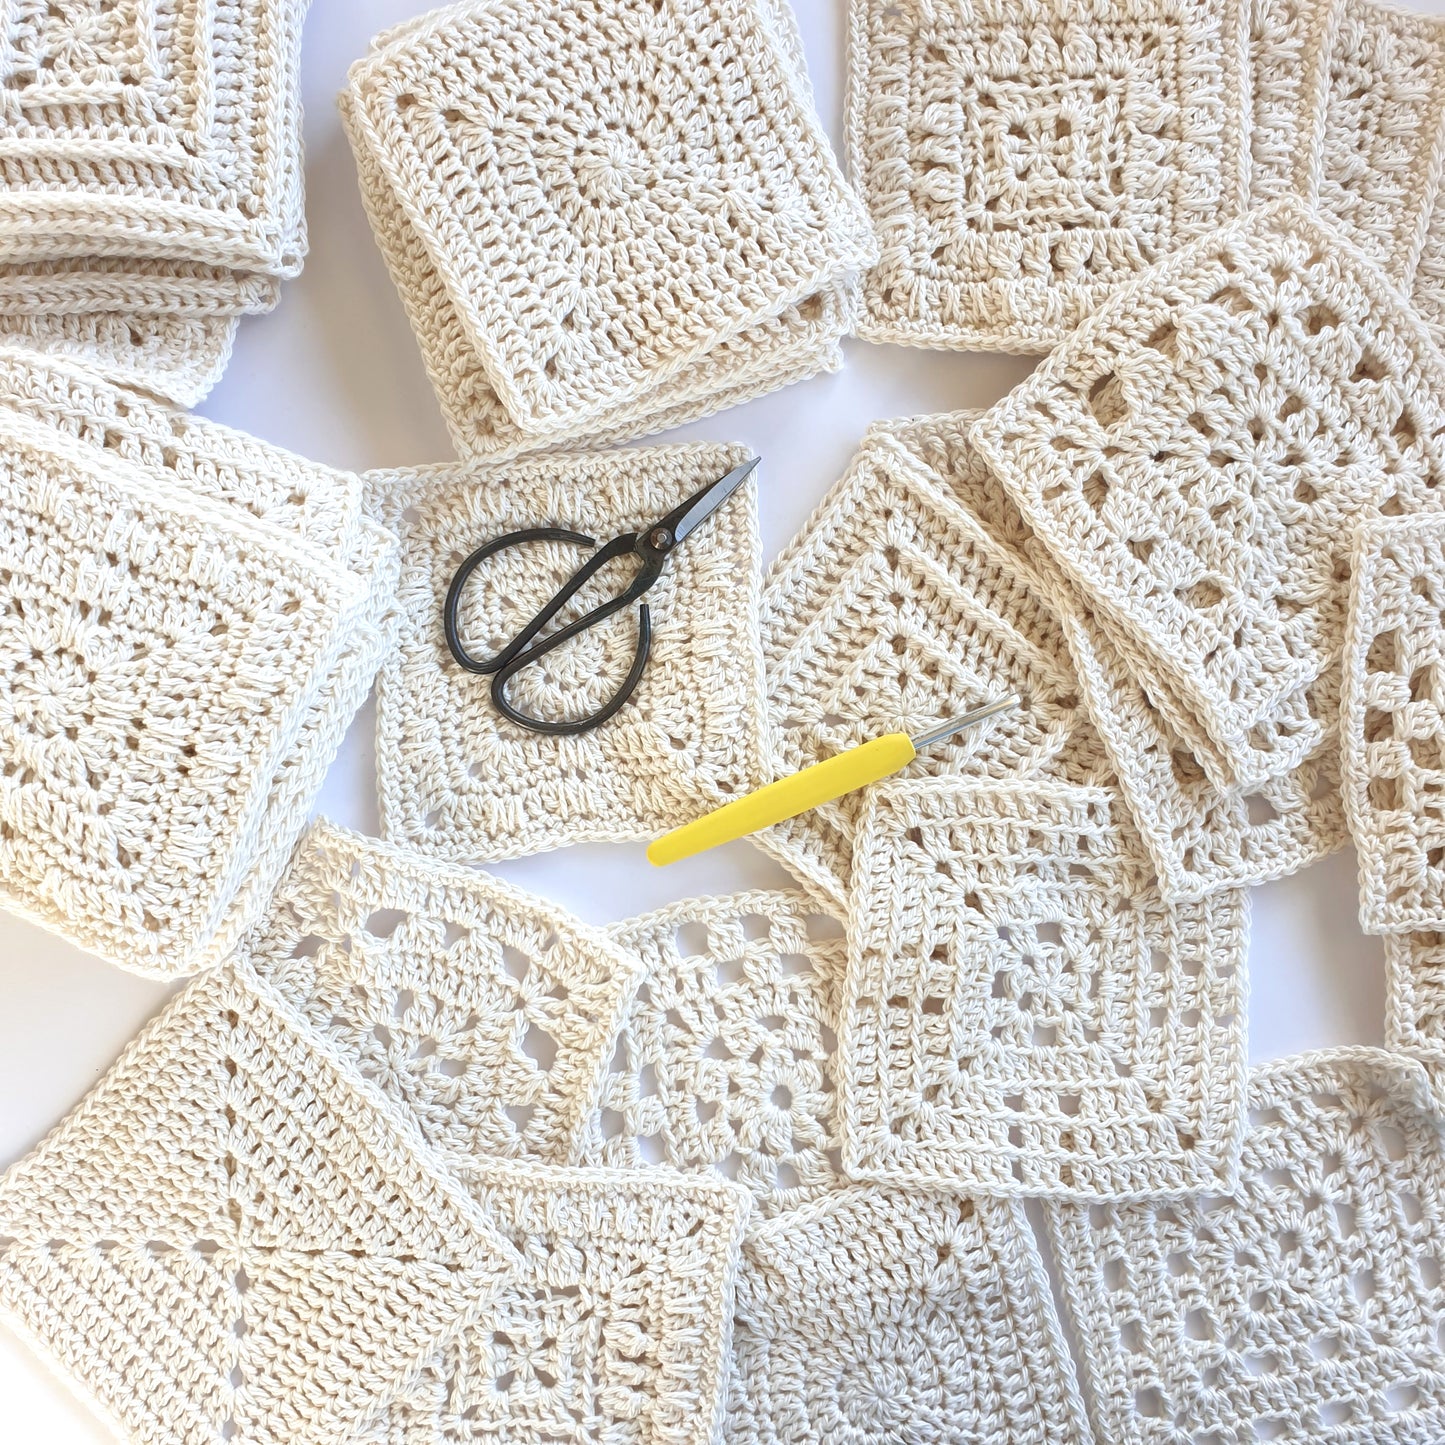 Granny Squares from Granny Square Academy by Shelley Husband with a yellow handled silver crochet hook and a pair of black yarn scissors